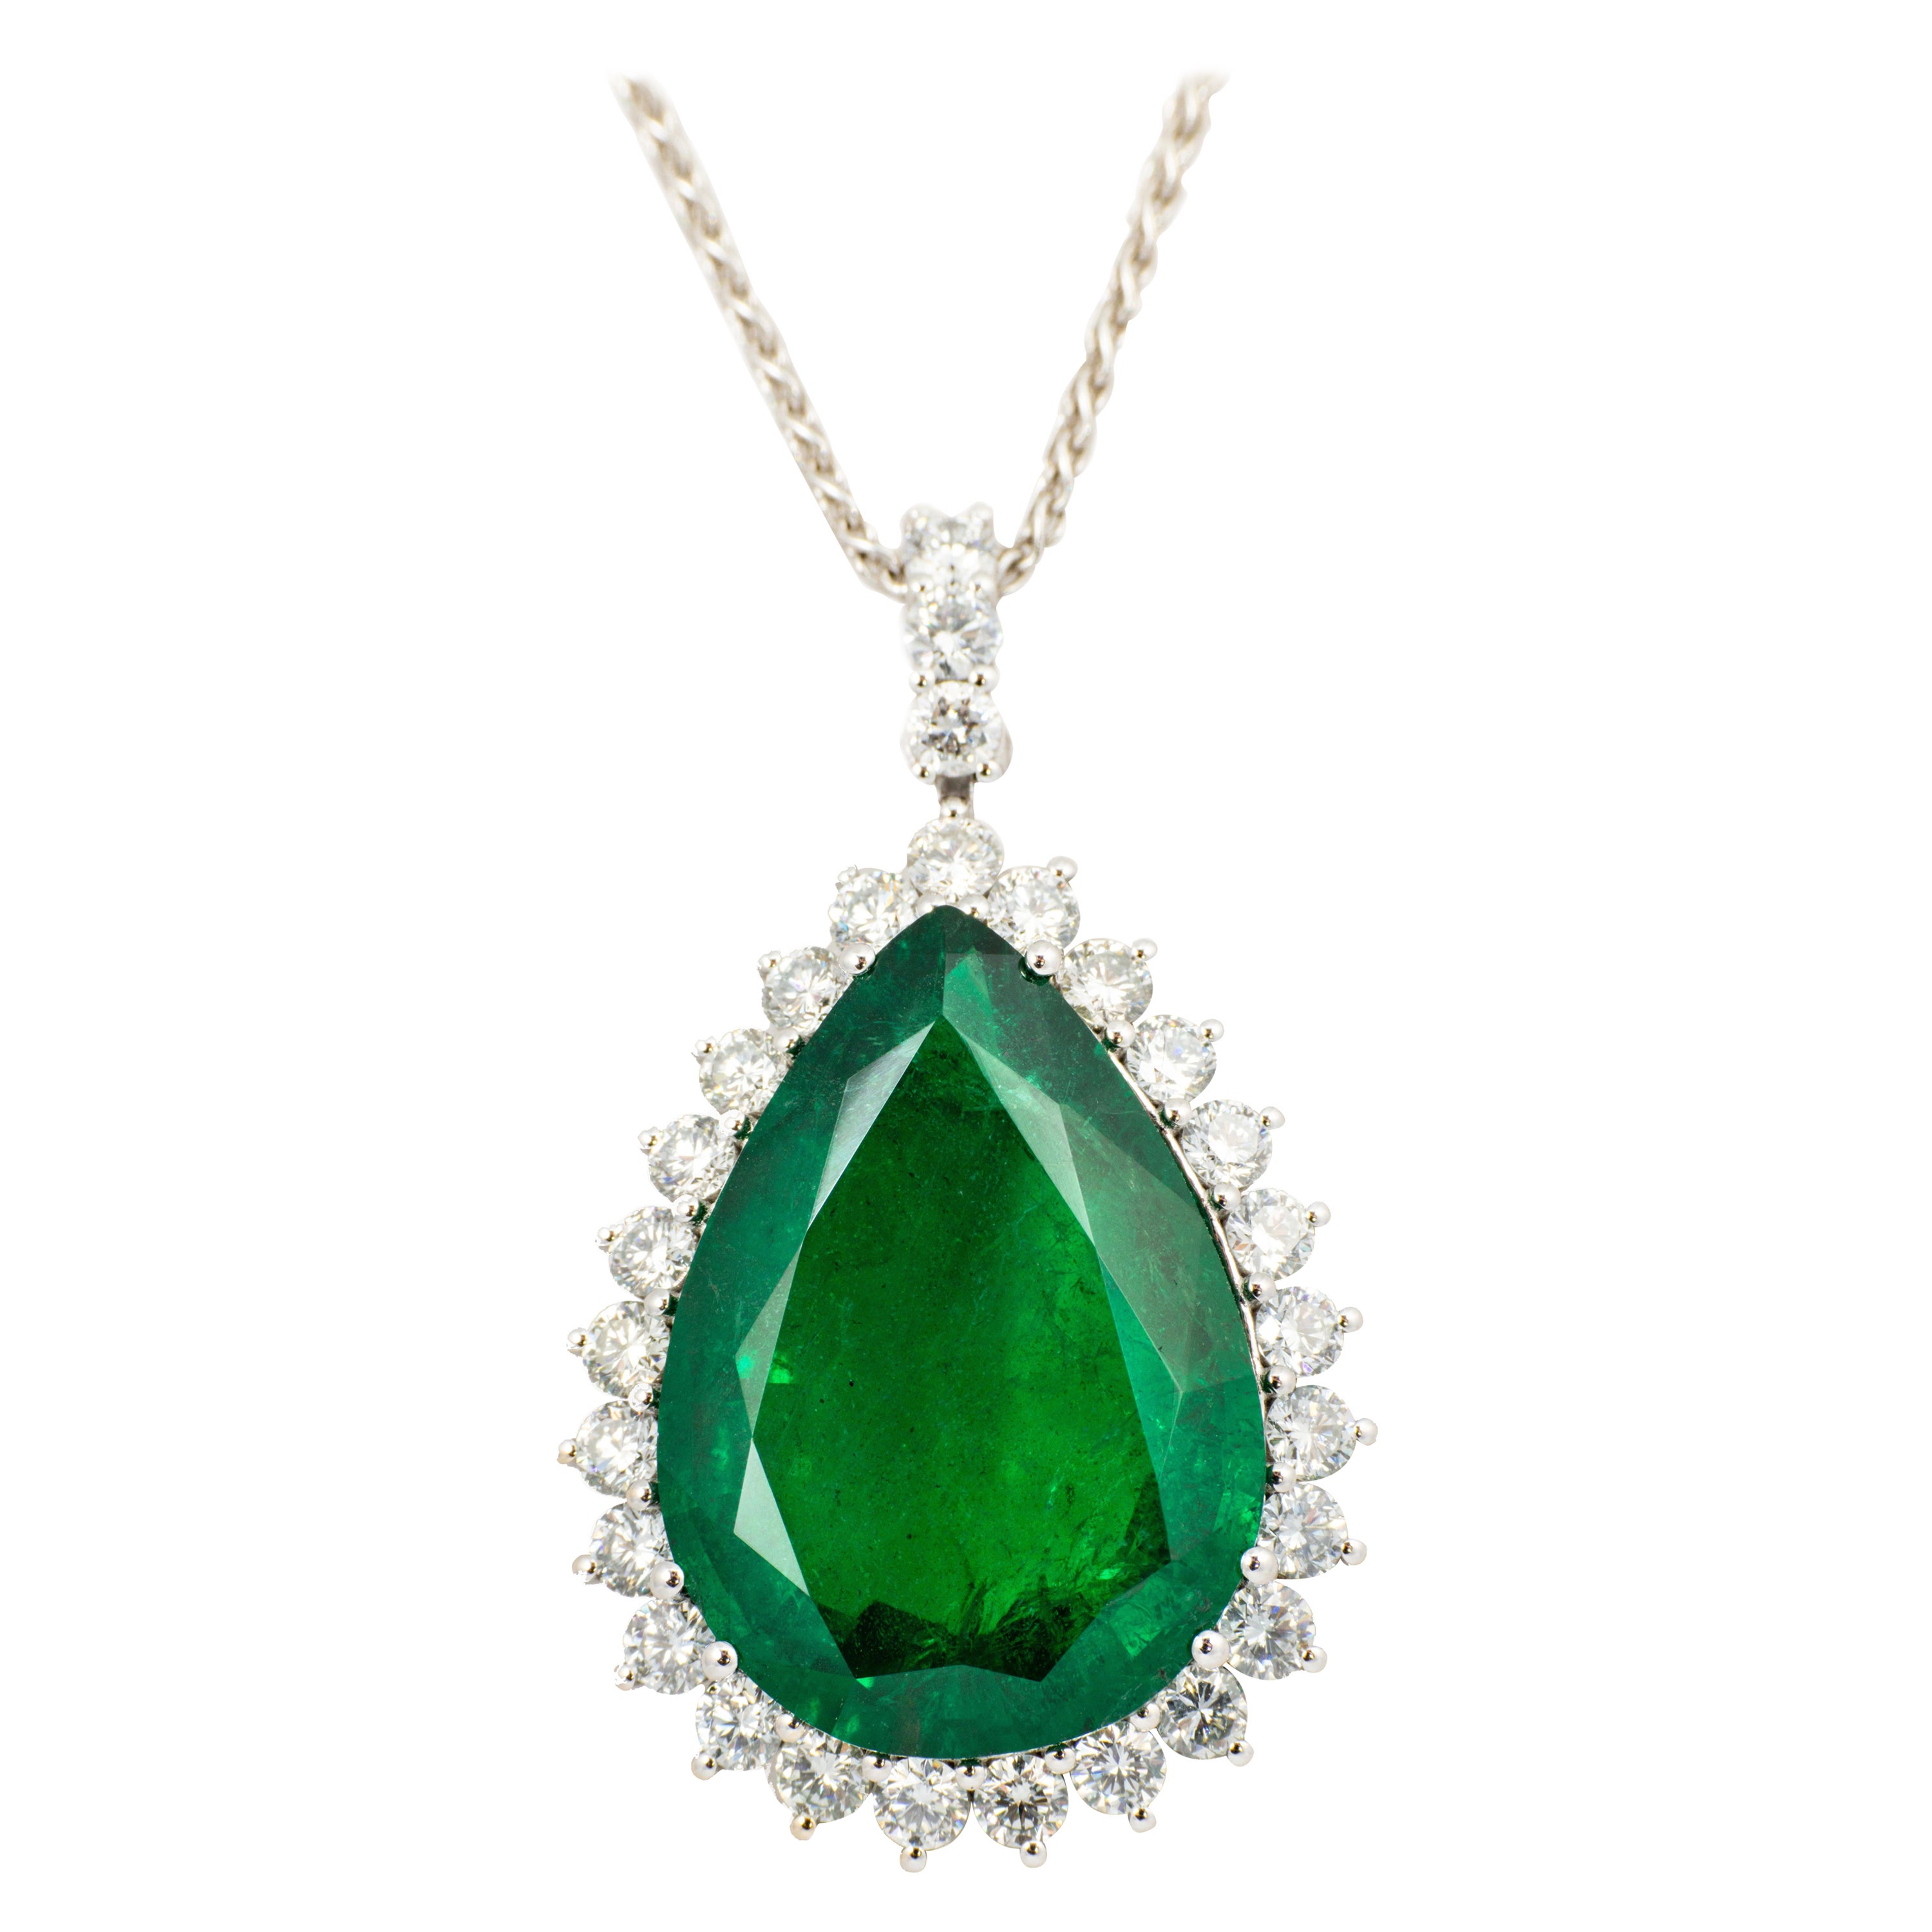 "Costis" Rare Emerald GRS Certified 27.56 Ct, Zambia Pear Cut, Diamonds Necklace For Sale